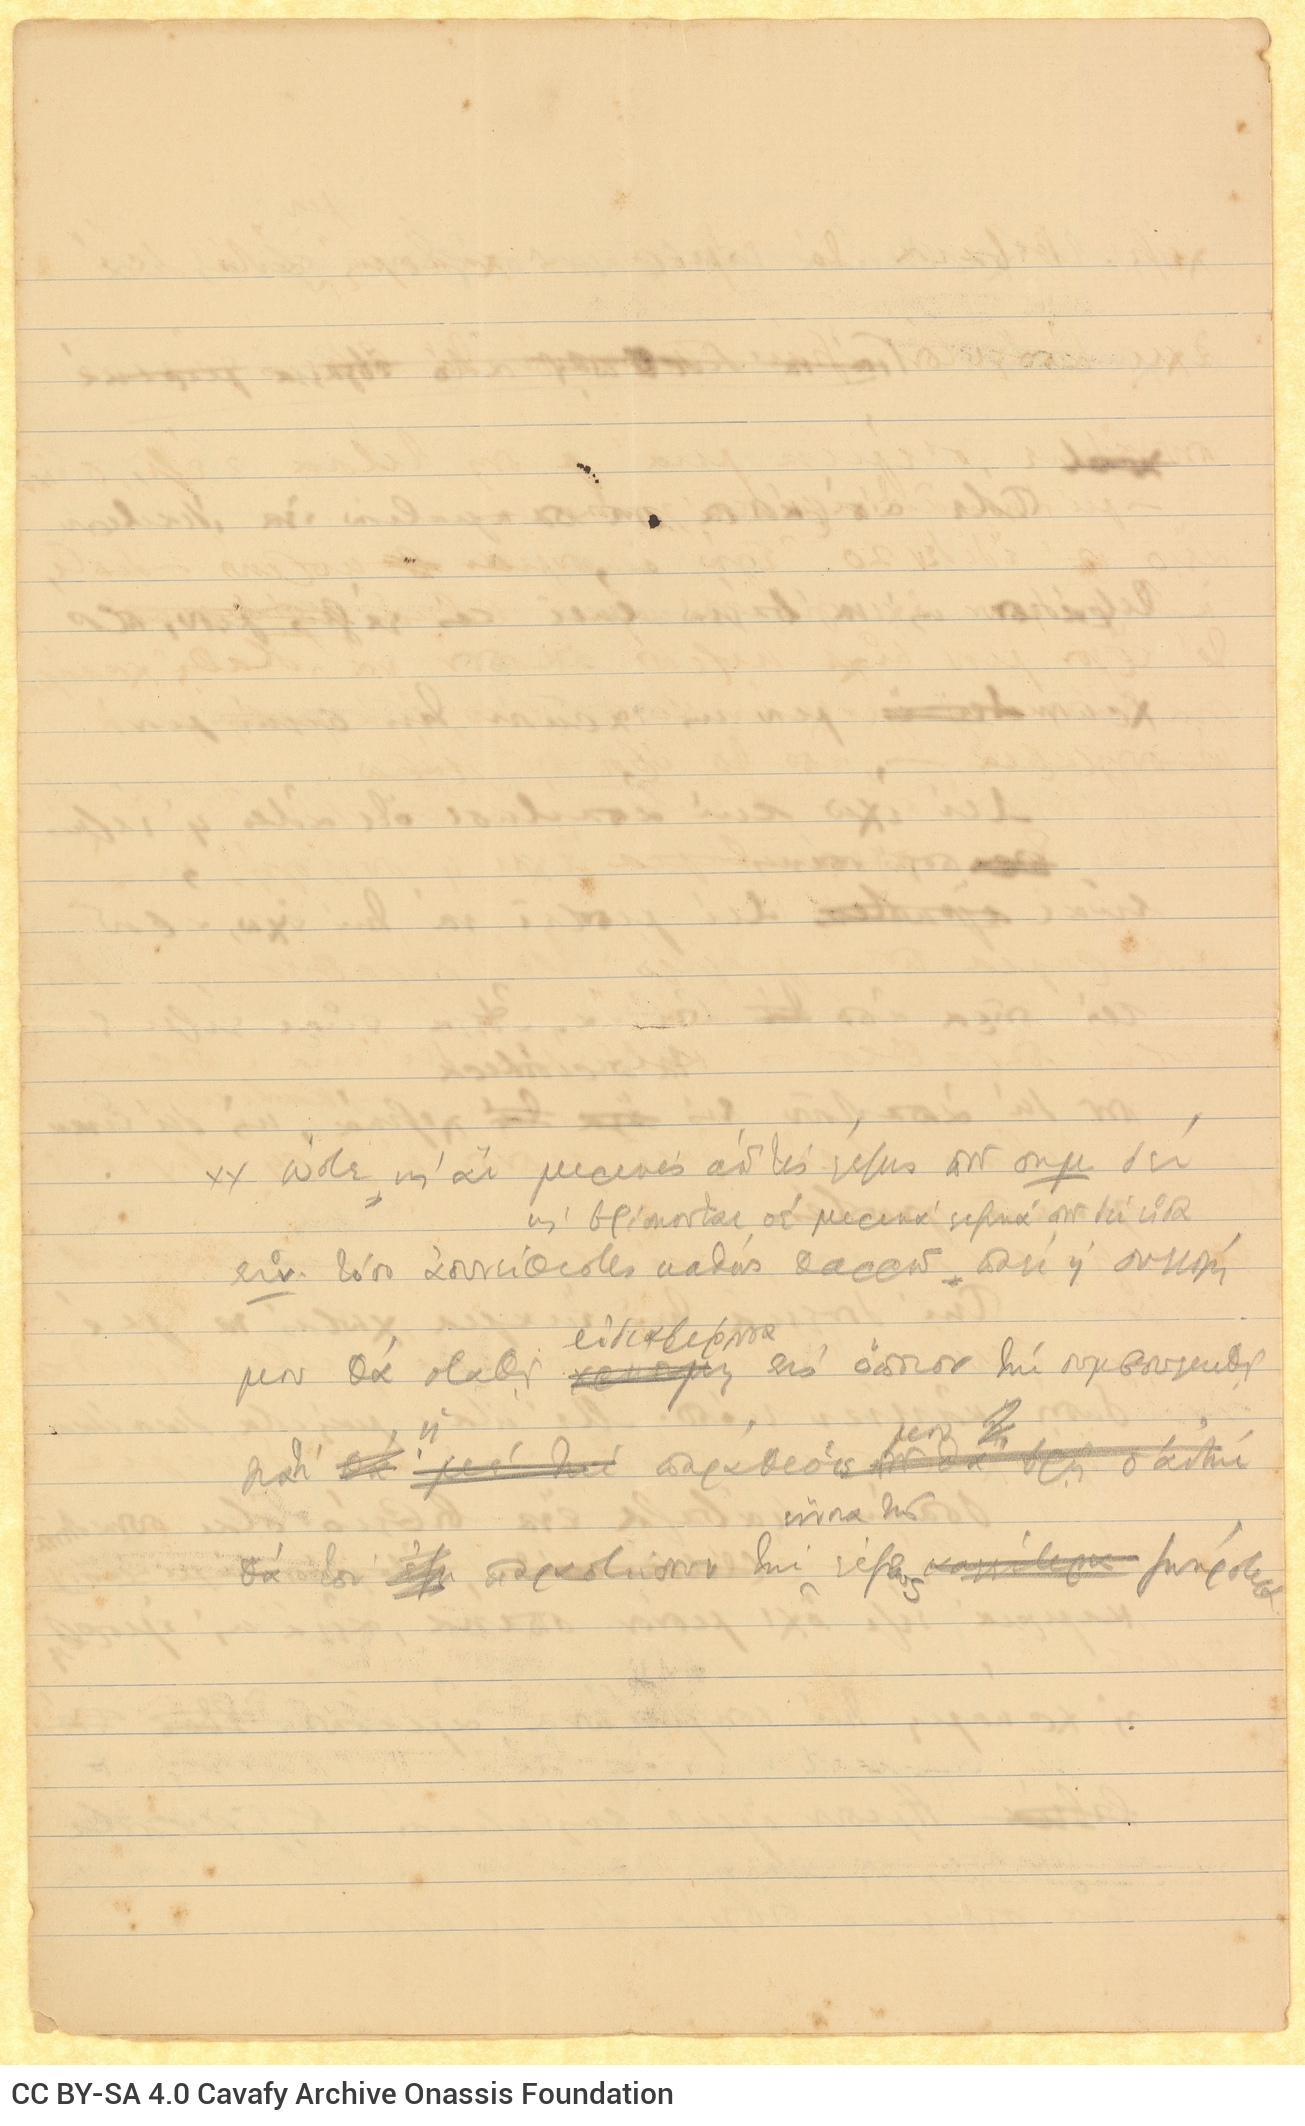 Handwritten text on two ruled double sheet notepapers. Cancellations, emendations and additions. The poet mentions the rea